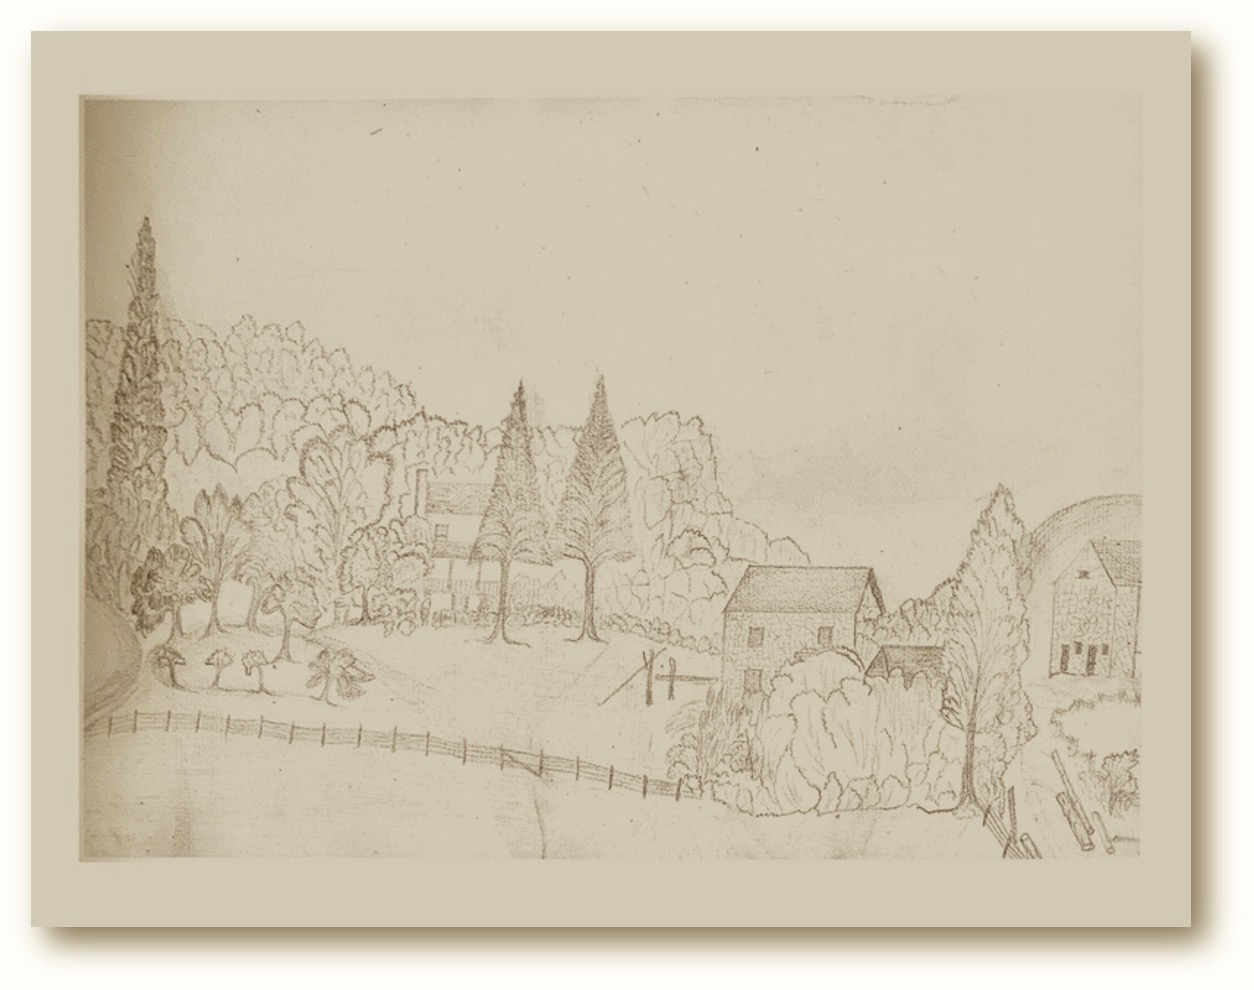 Pencil drawing of a farm landscape with stone buildings and trees.